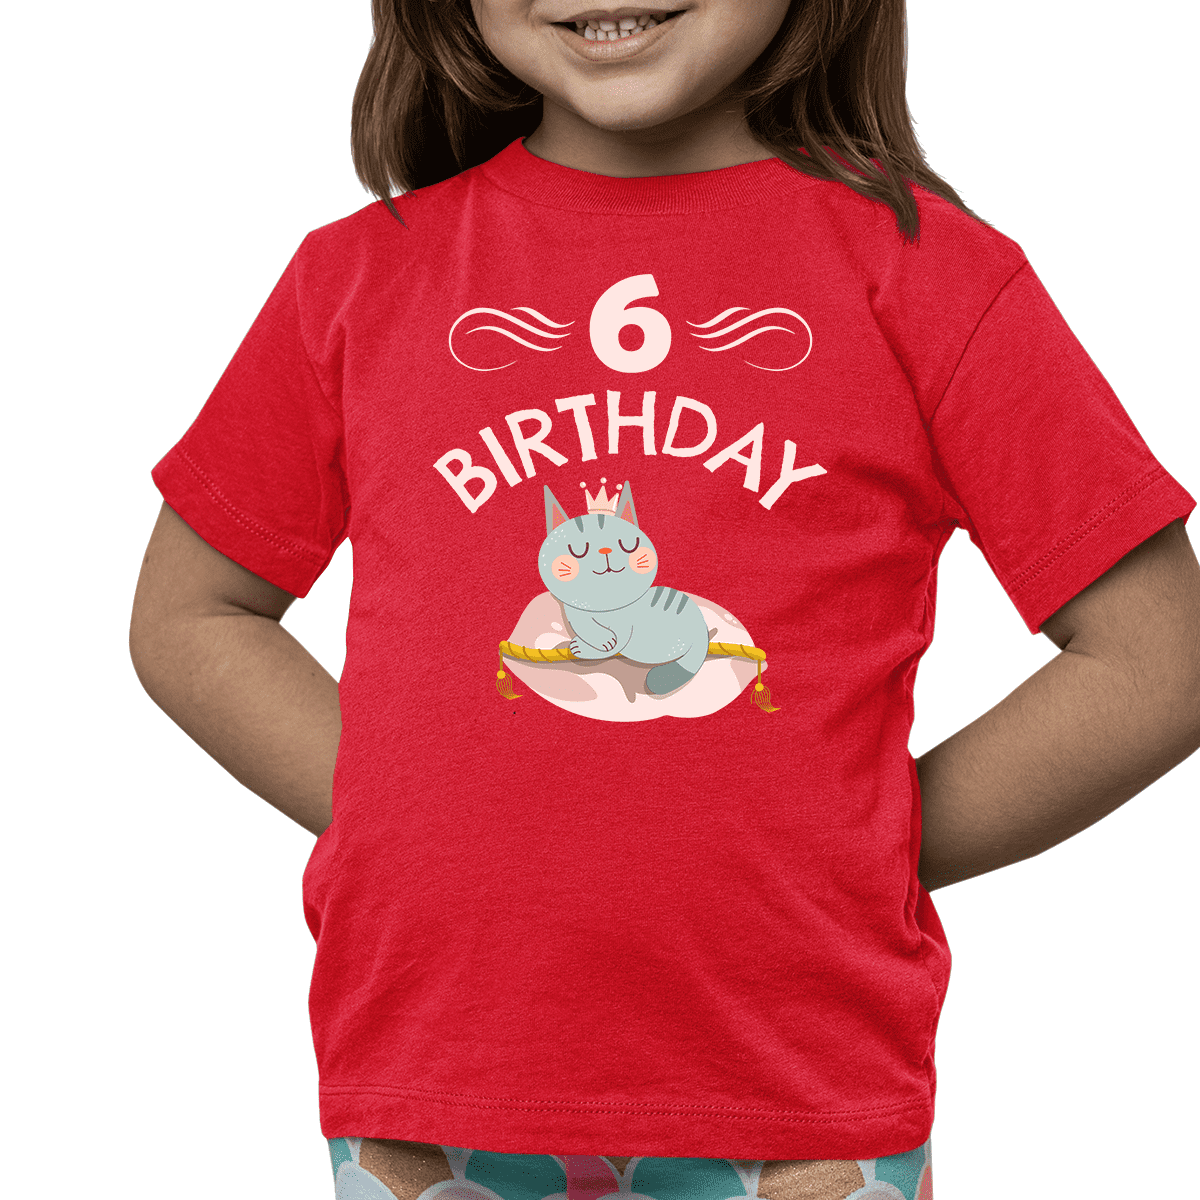 6 Spring, birthday gift for 6 year old girl, Kids' T-Shirt